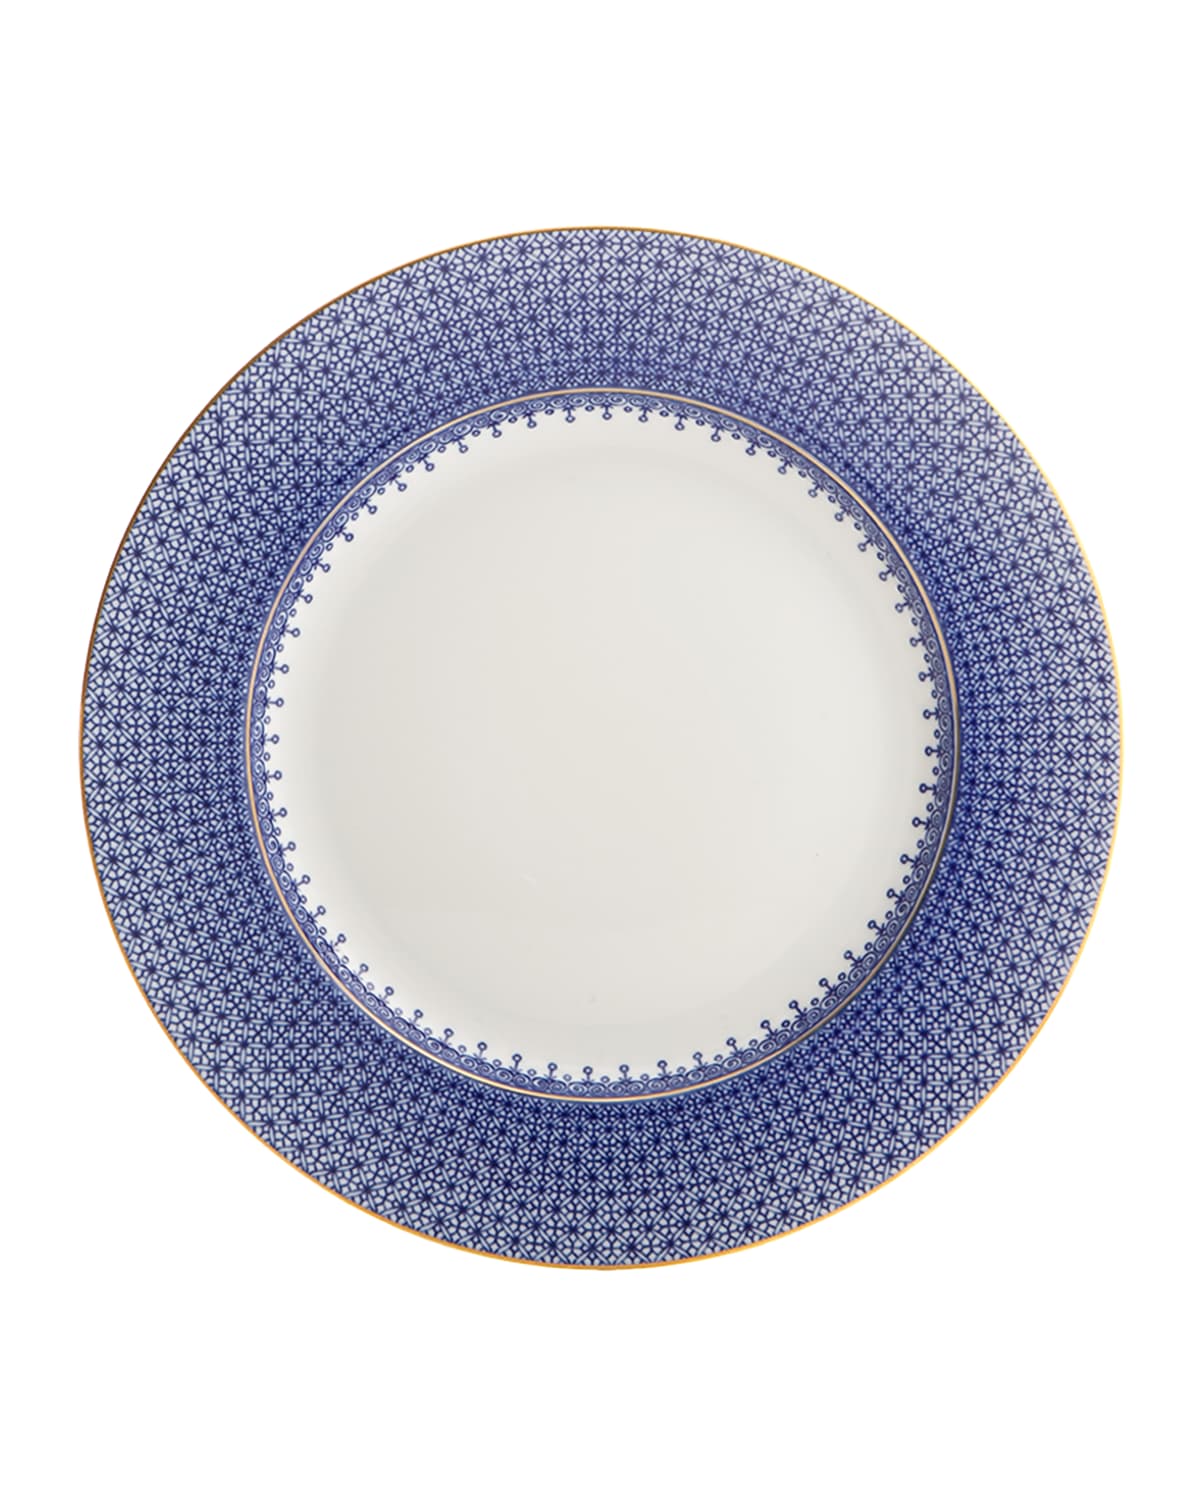 MOTTAHEDEH BLUE LACE DINNER PLATE